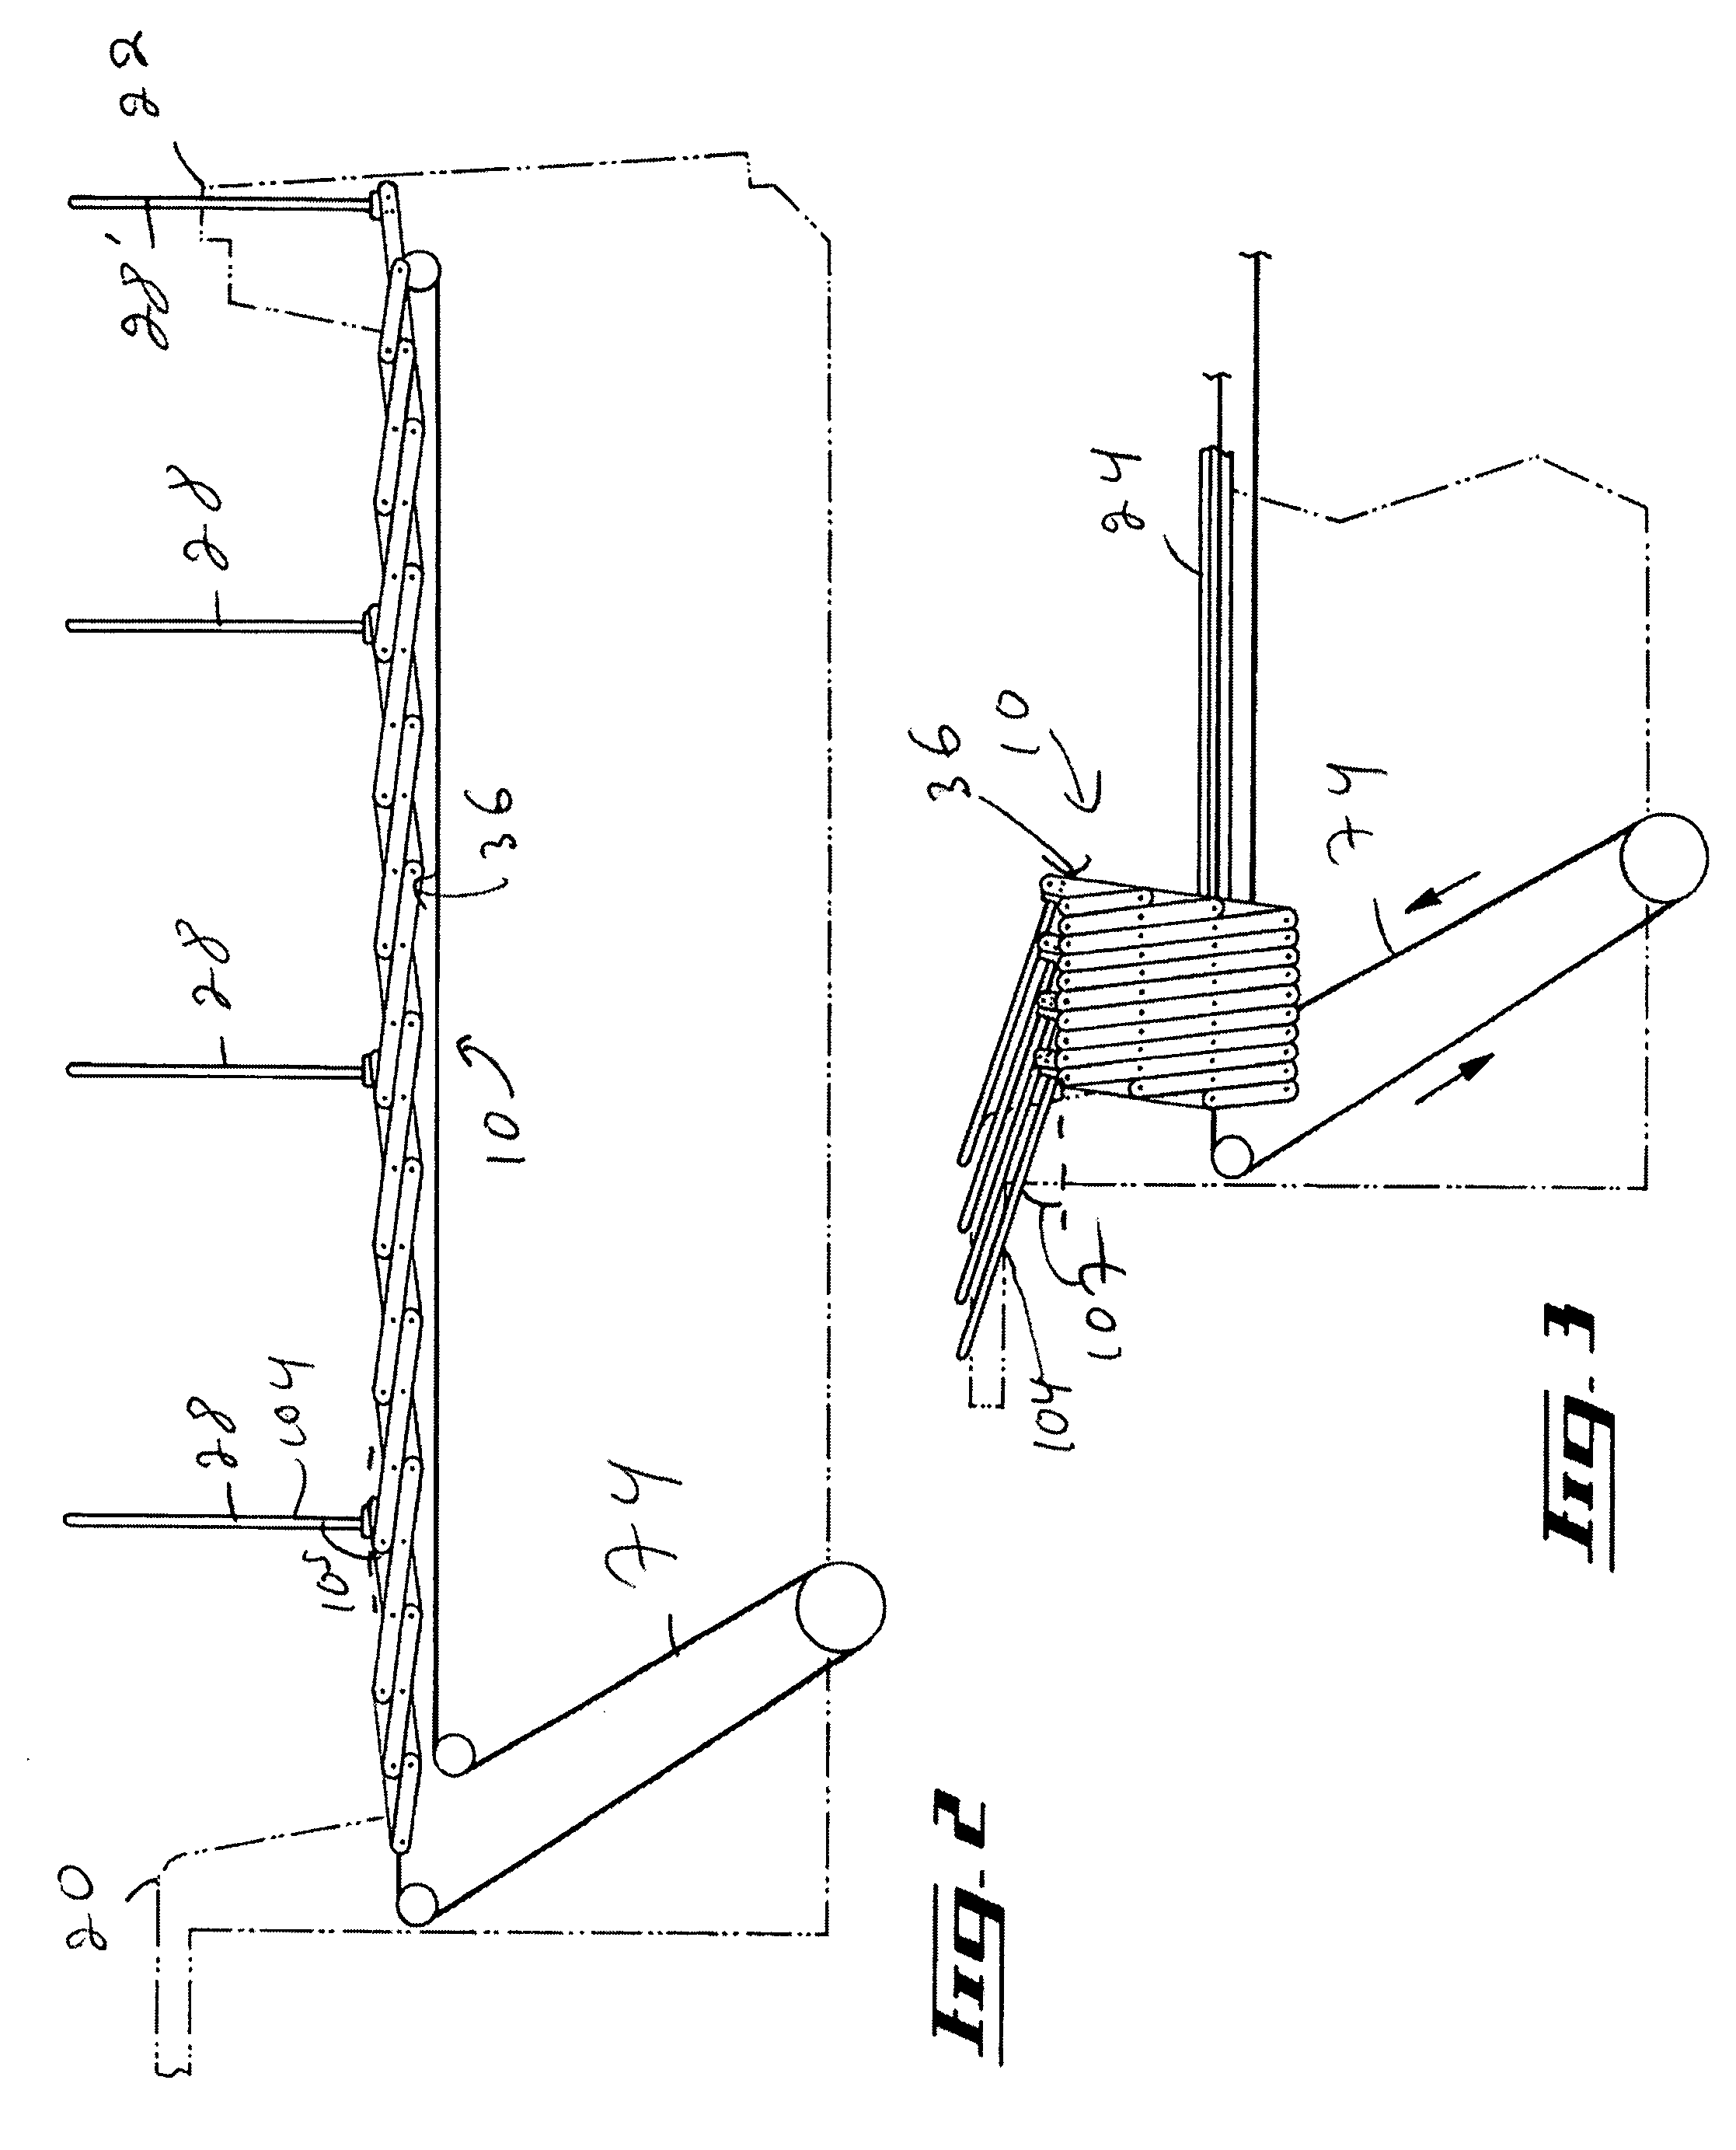 Device for manipulating a tarpaulin